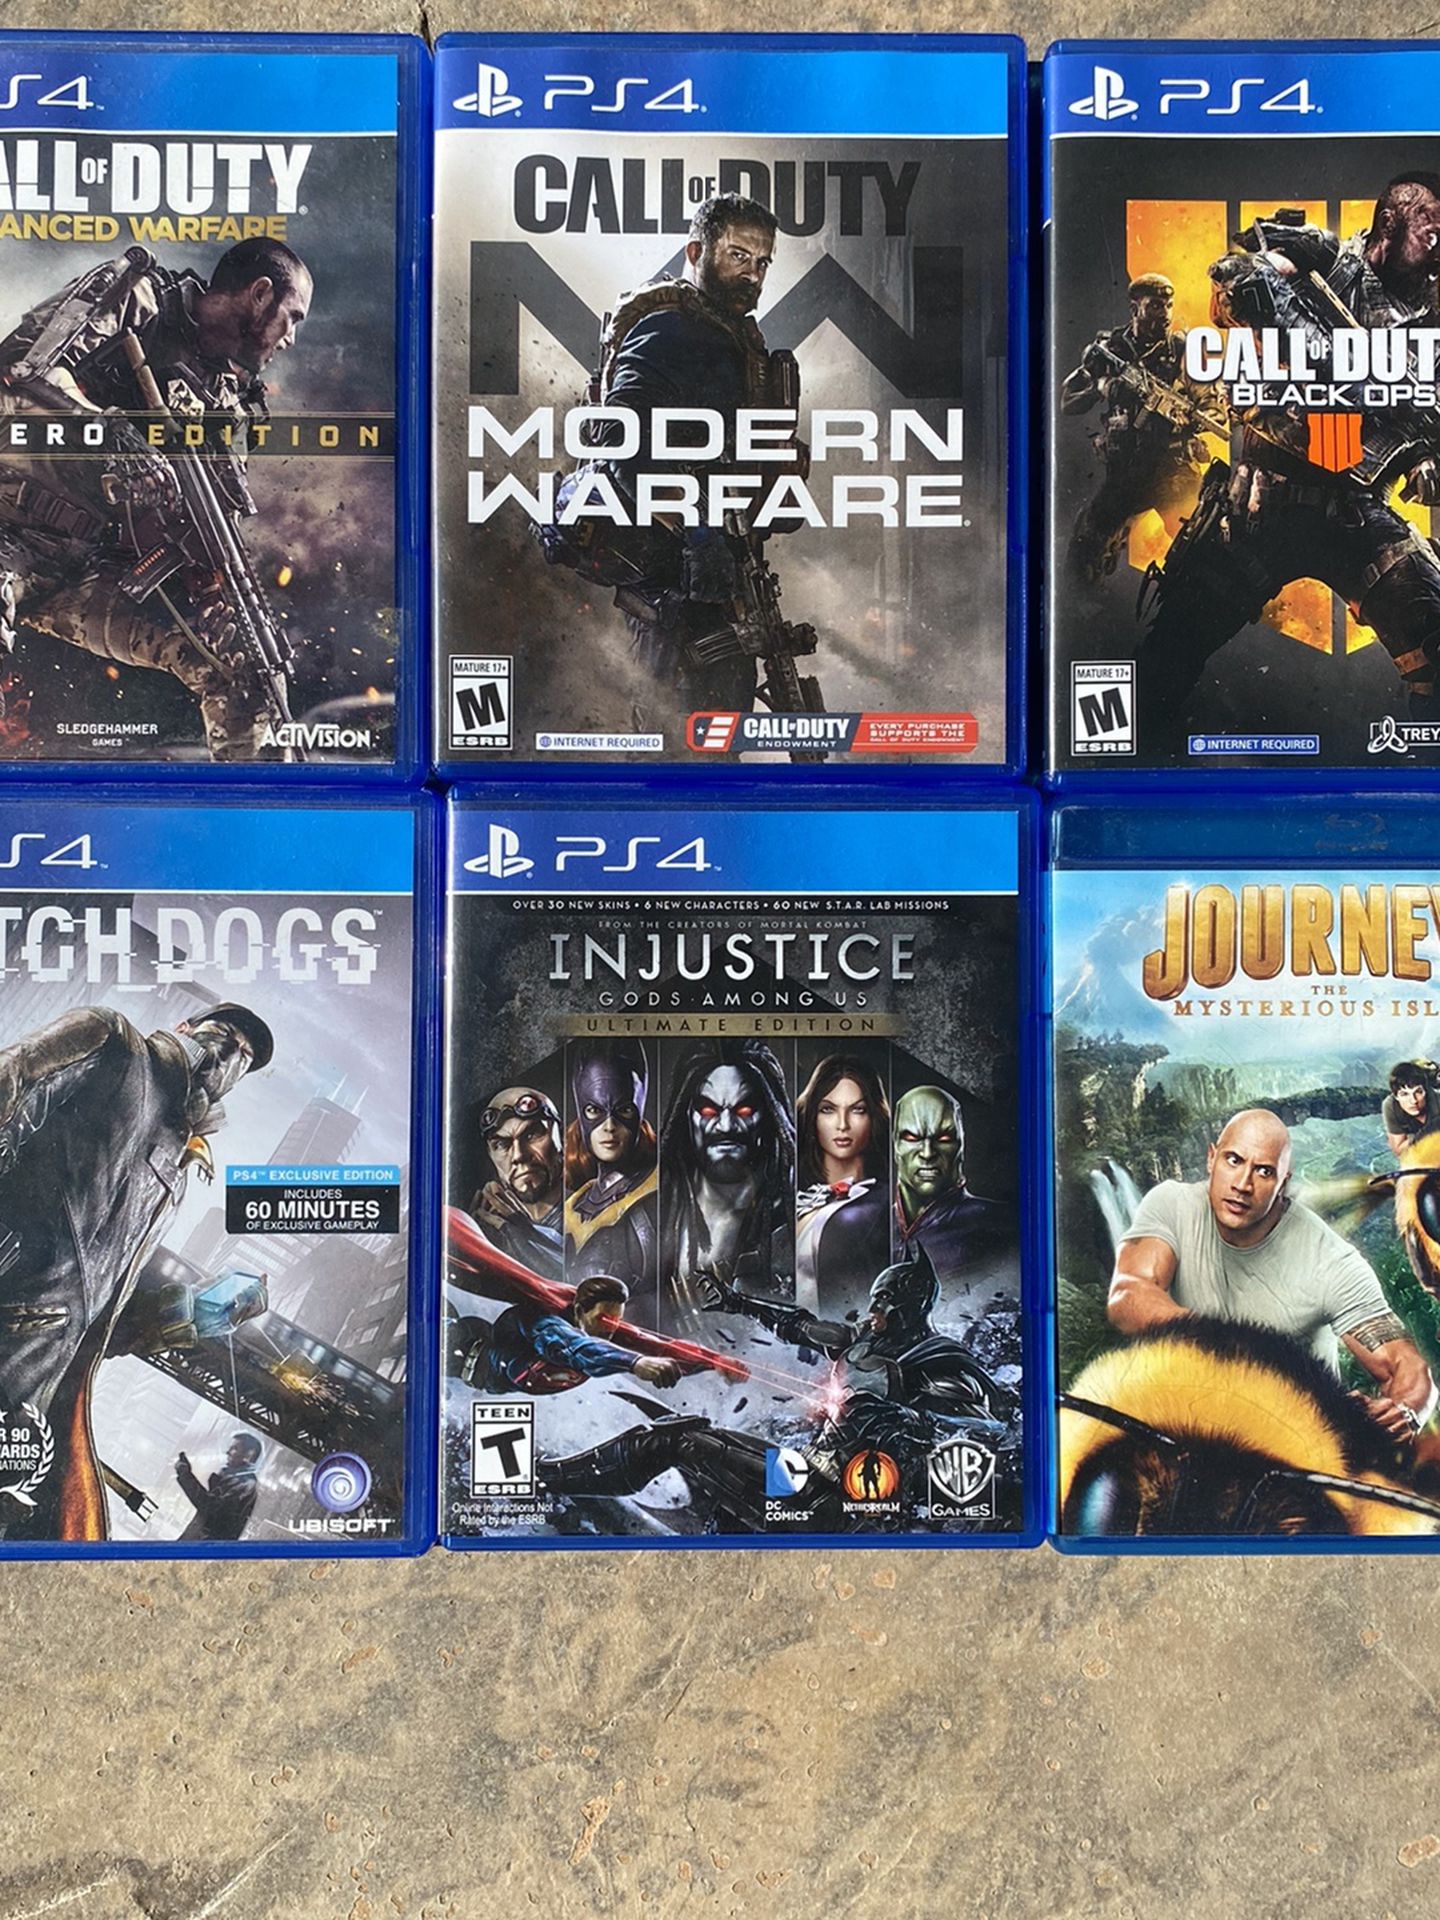 PS4 Games “Call of Duty” and more